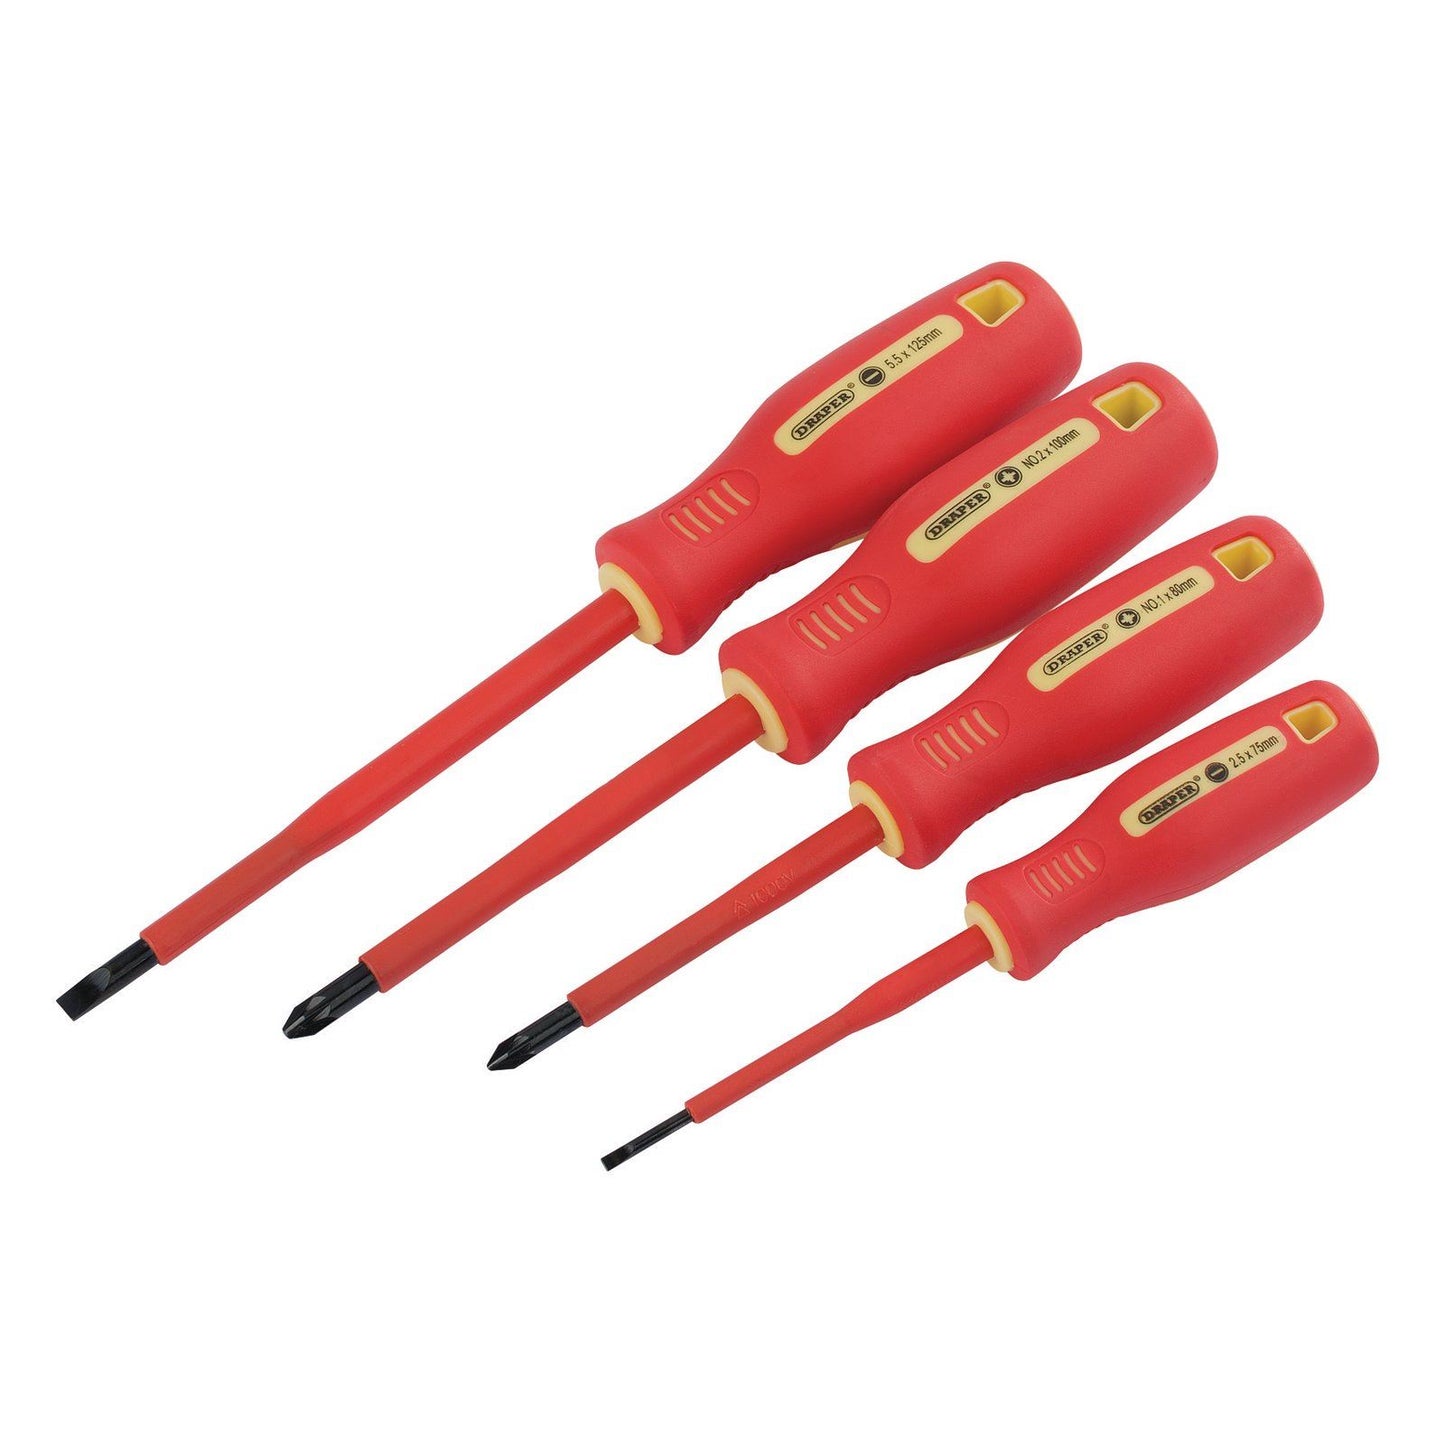 Draper 46539 Fully Insulated VDE Electrician's Screwdriver Set - 4 Piece